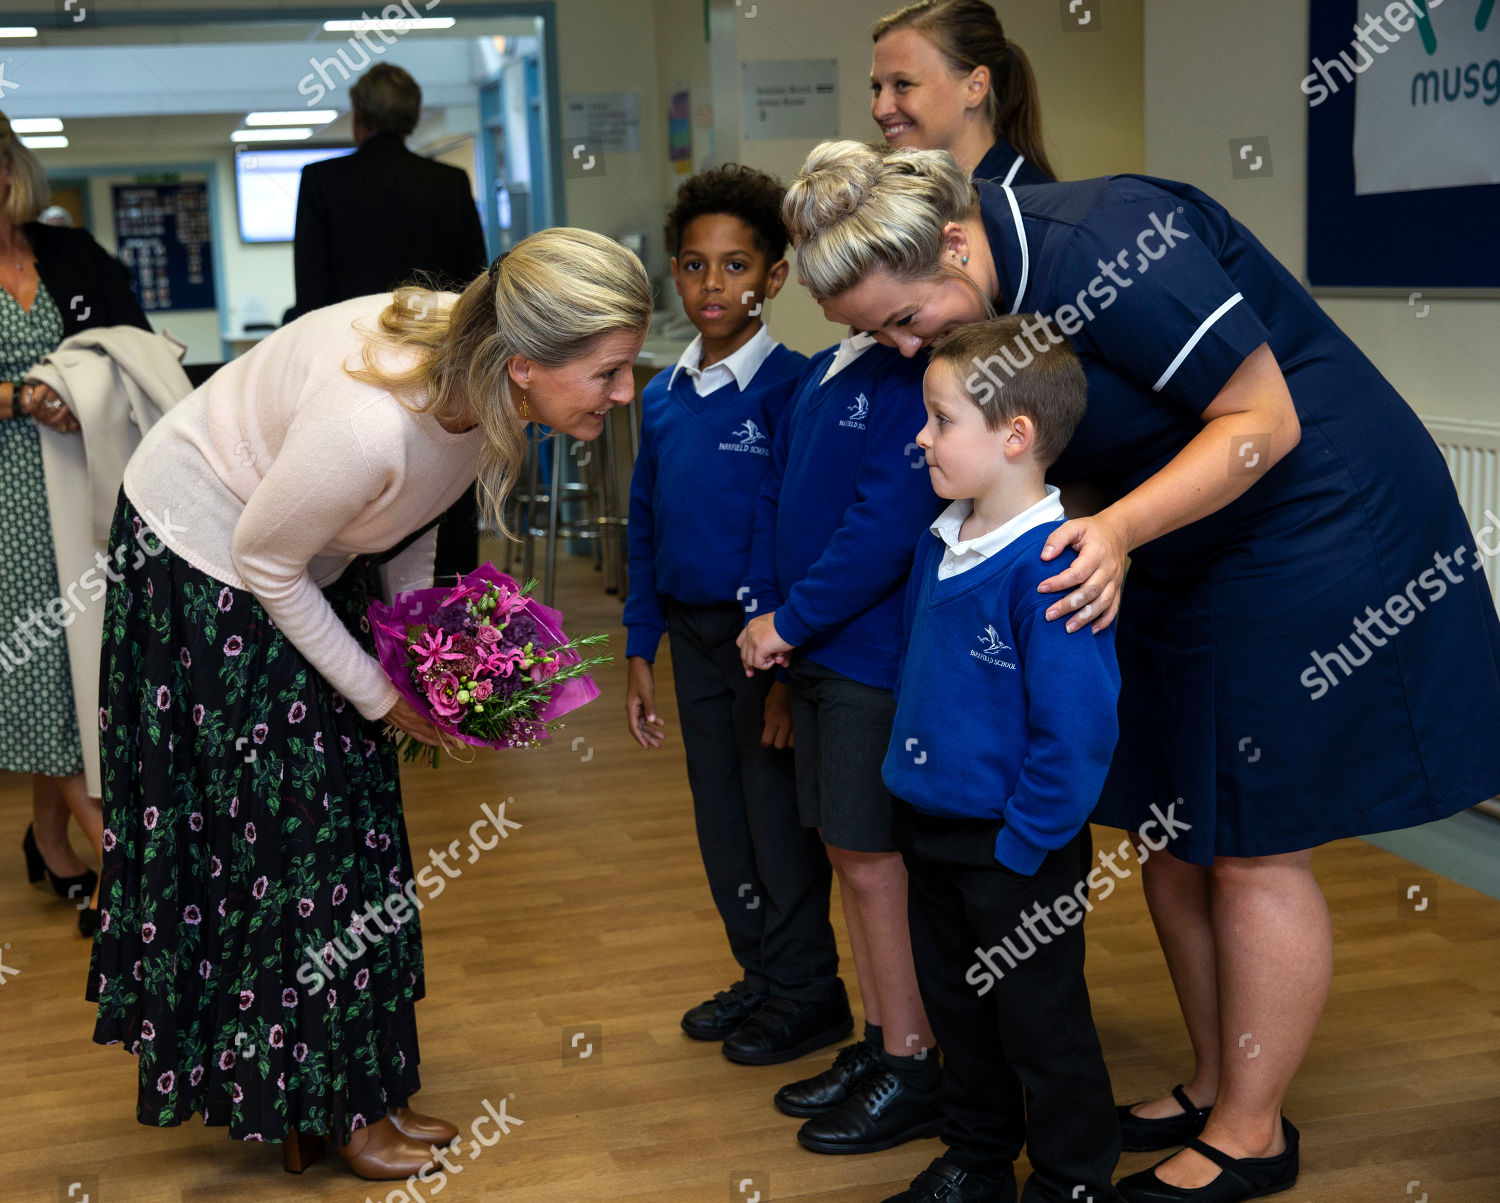 sophie-countess-of-wessex-visit-to-musgrove-park-hospital-taunton-somerset-uk-shutterstock-editorial-10422506au.jpg